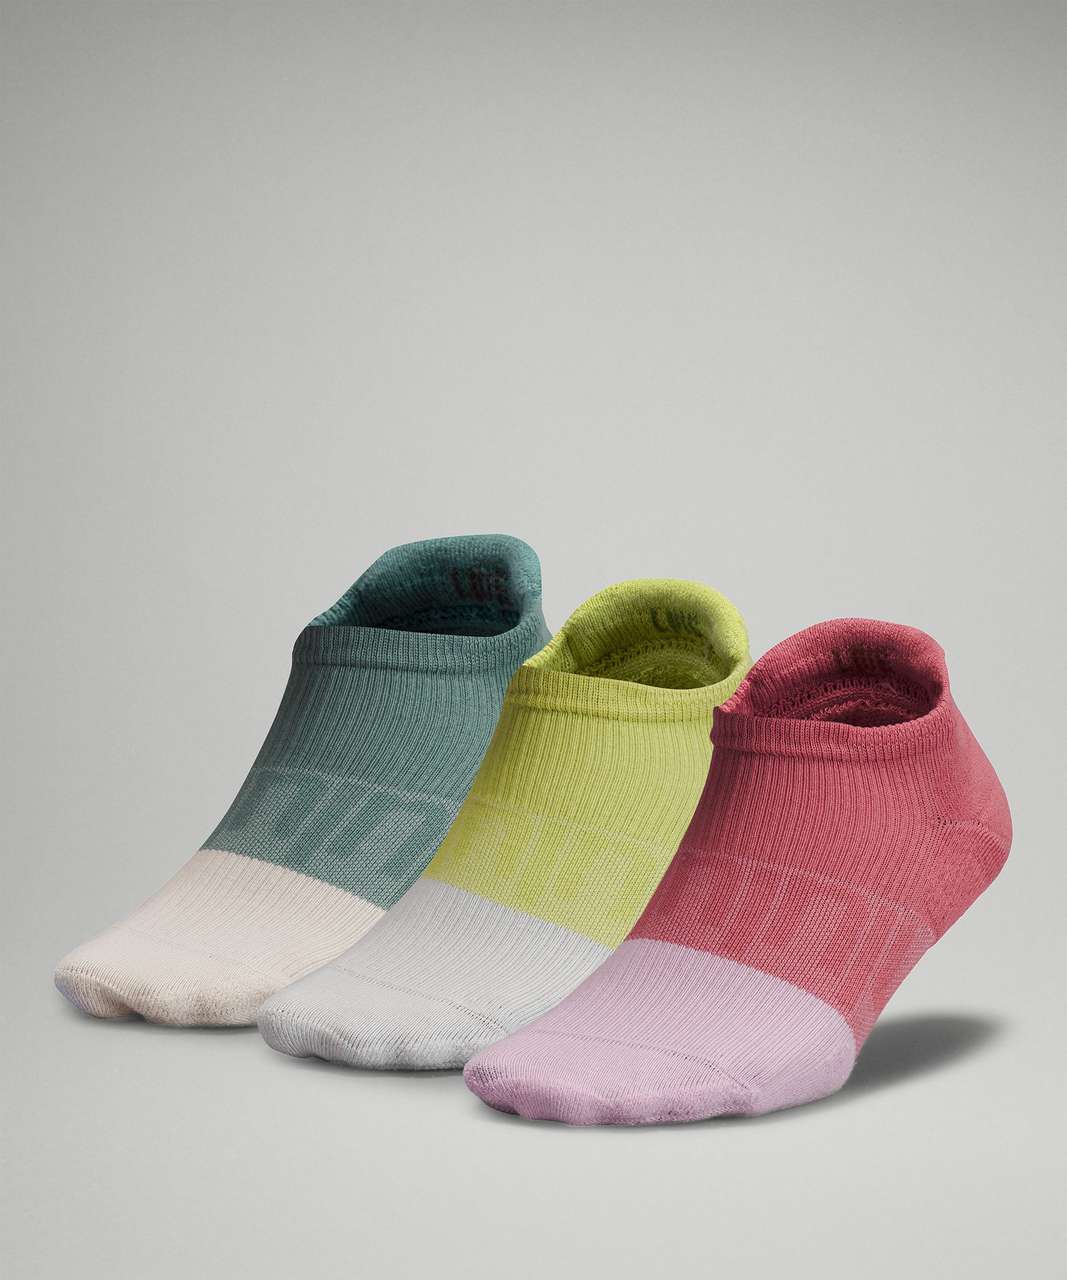 Lululemon Daily Stride Low-Ankle Sock 3 Pack *Multi-Colour - Brier Rose / Wasabi / Tidewater Teal